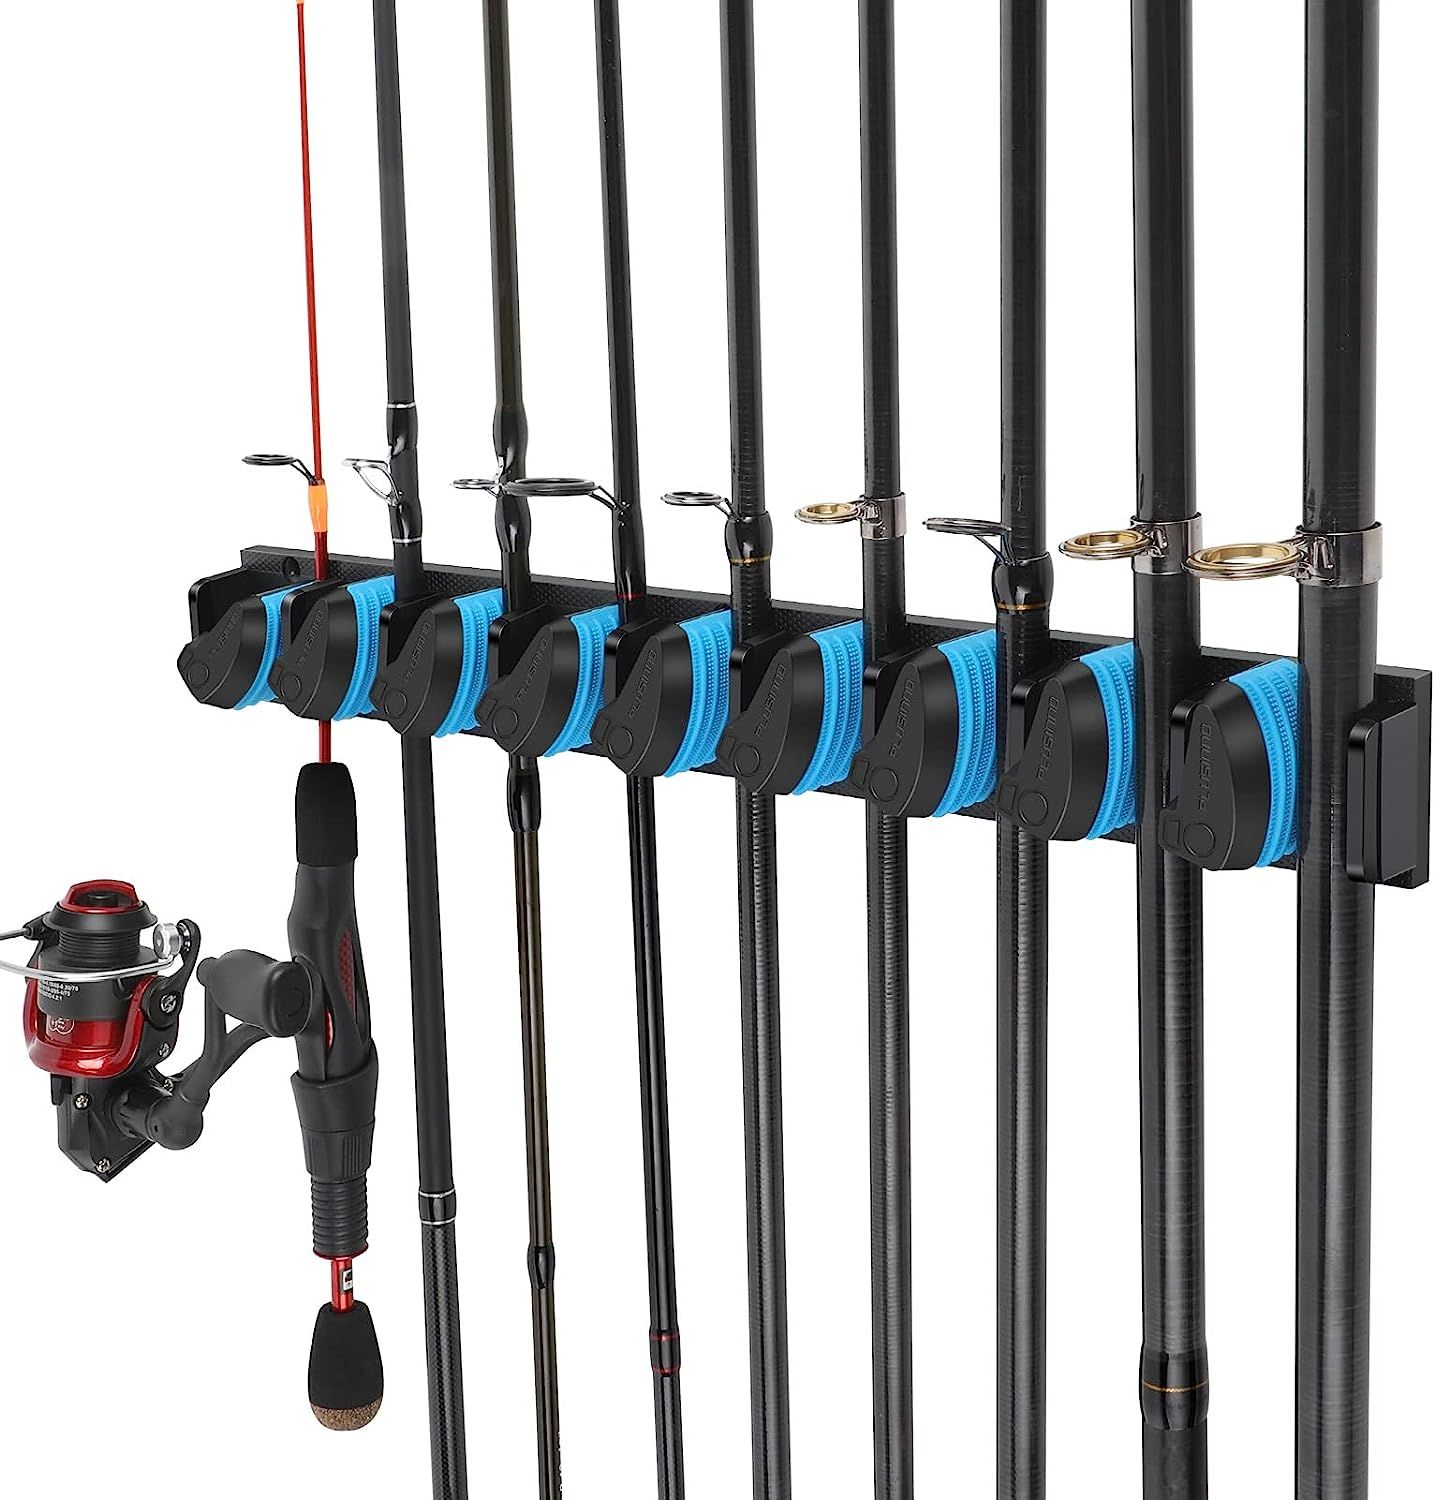 PLUSINNO Vertical Fishing Rod Holder, Wall Mounted Fishing Rod Rack, Fishing  Pole Holder Holds Up to 9 Rods or Combos, Fishing Rod Holders for Garage,  Fits Most Rods of Diameter 3-19mm, Sports